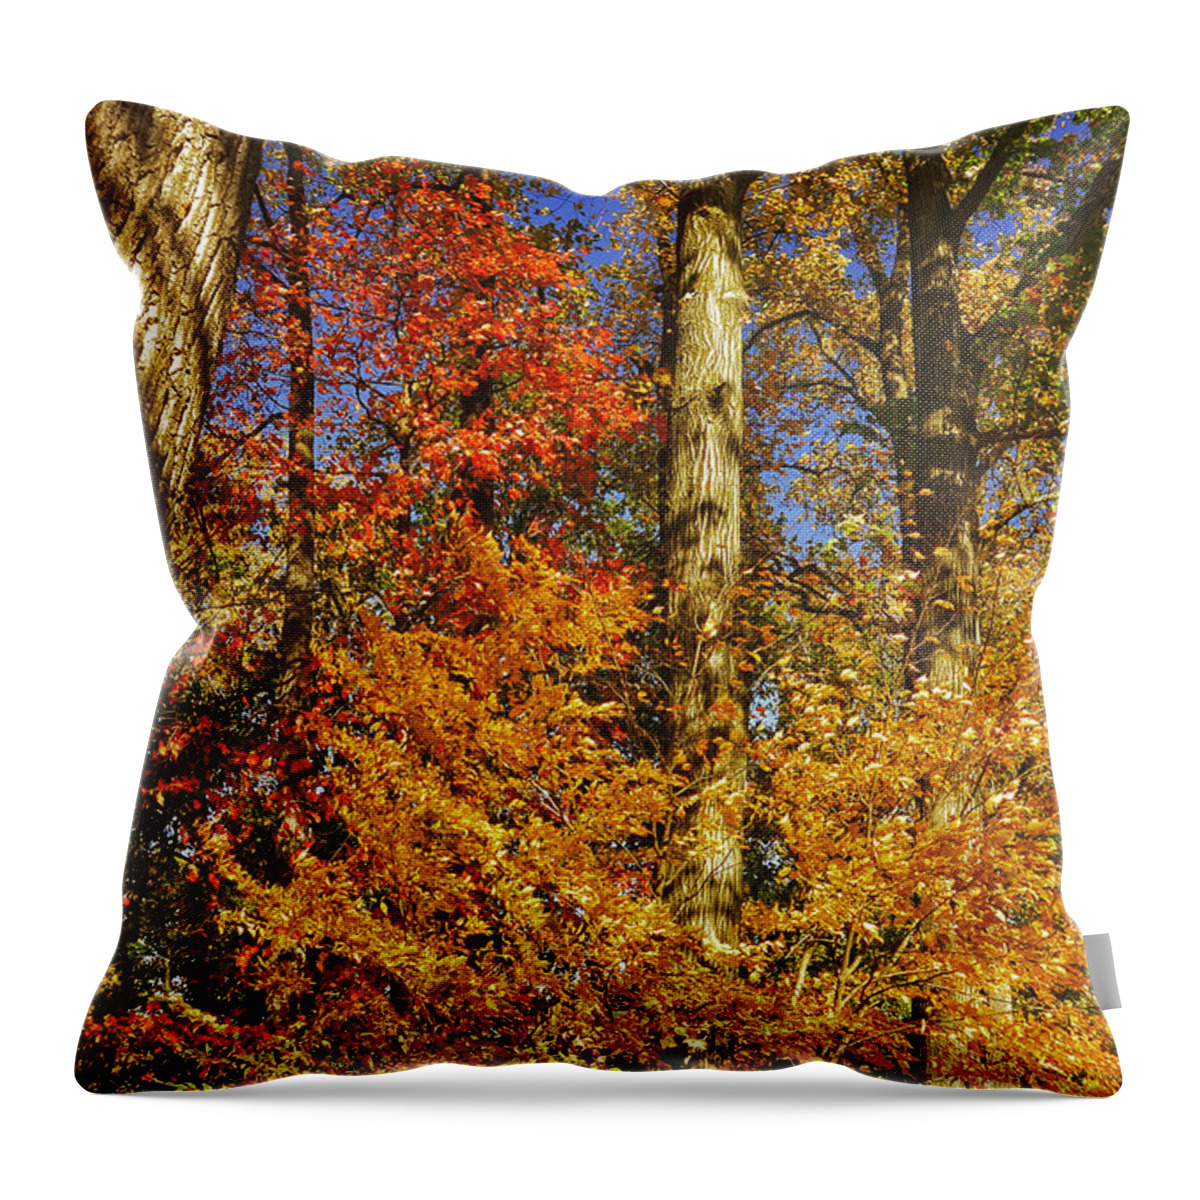 Autumn Throw Pillow featuring the photograph Autumn Trees by Kathi Isserman